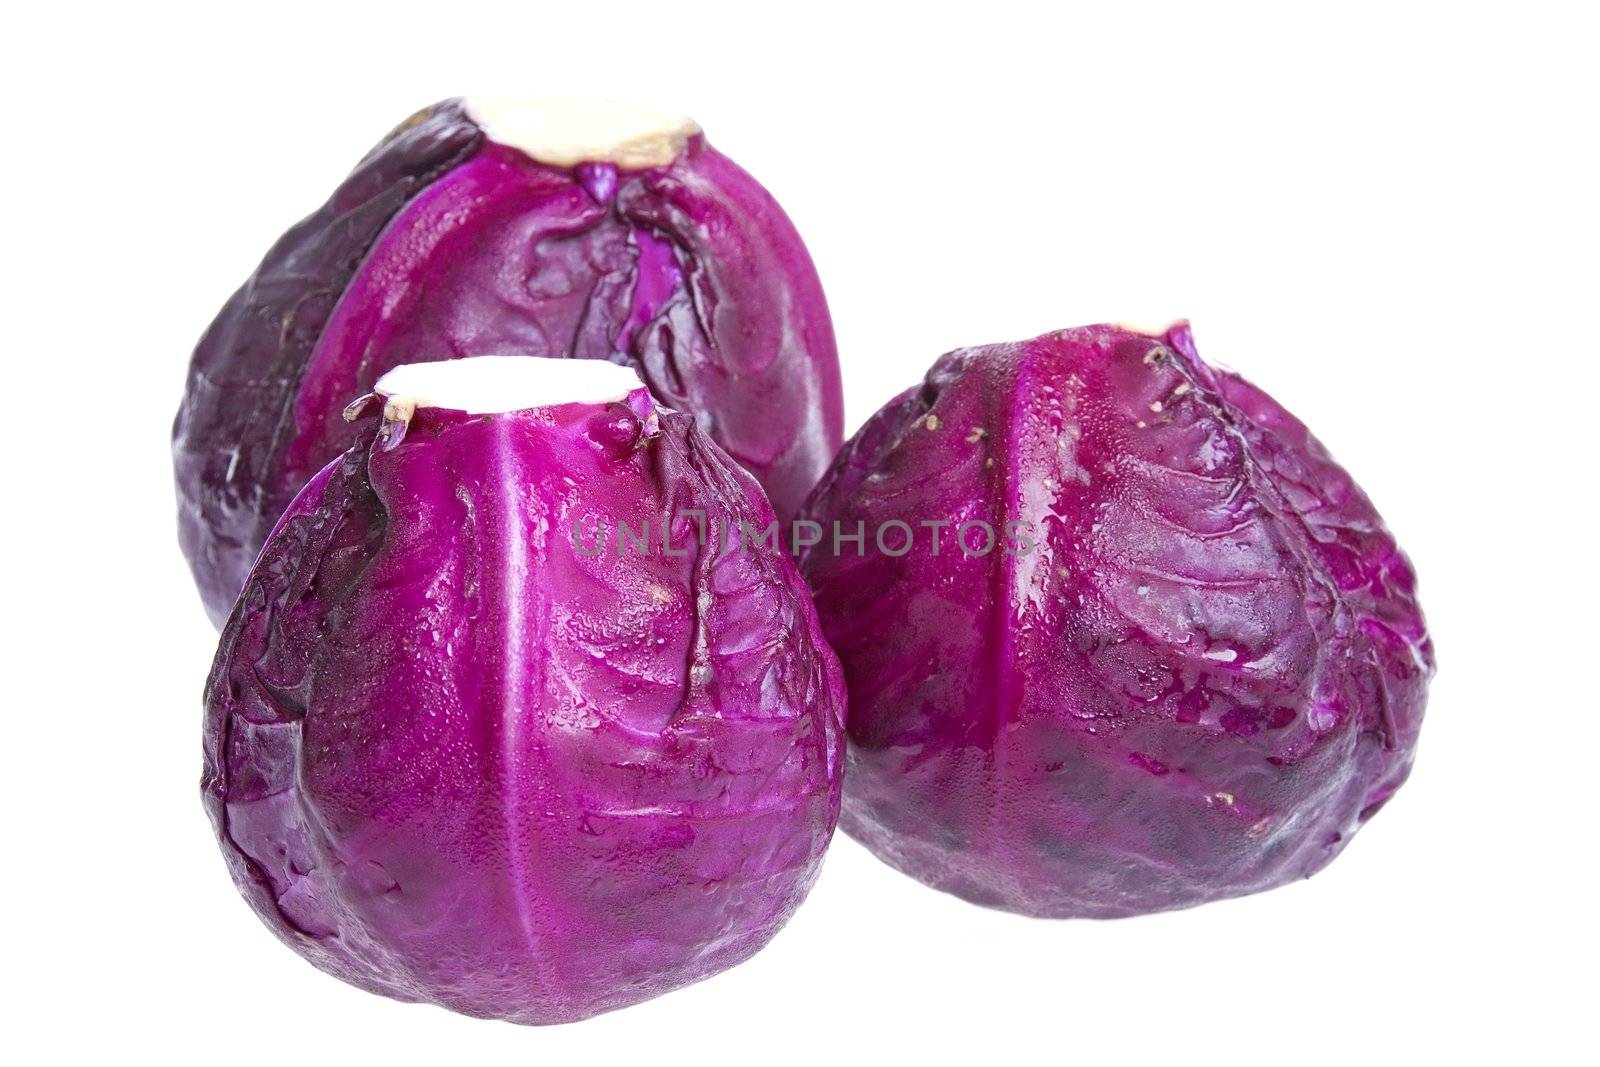 Isolated image of organically grown red cabbages.